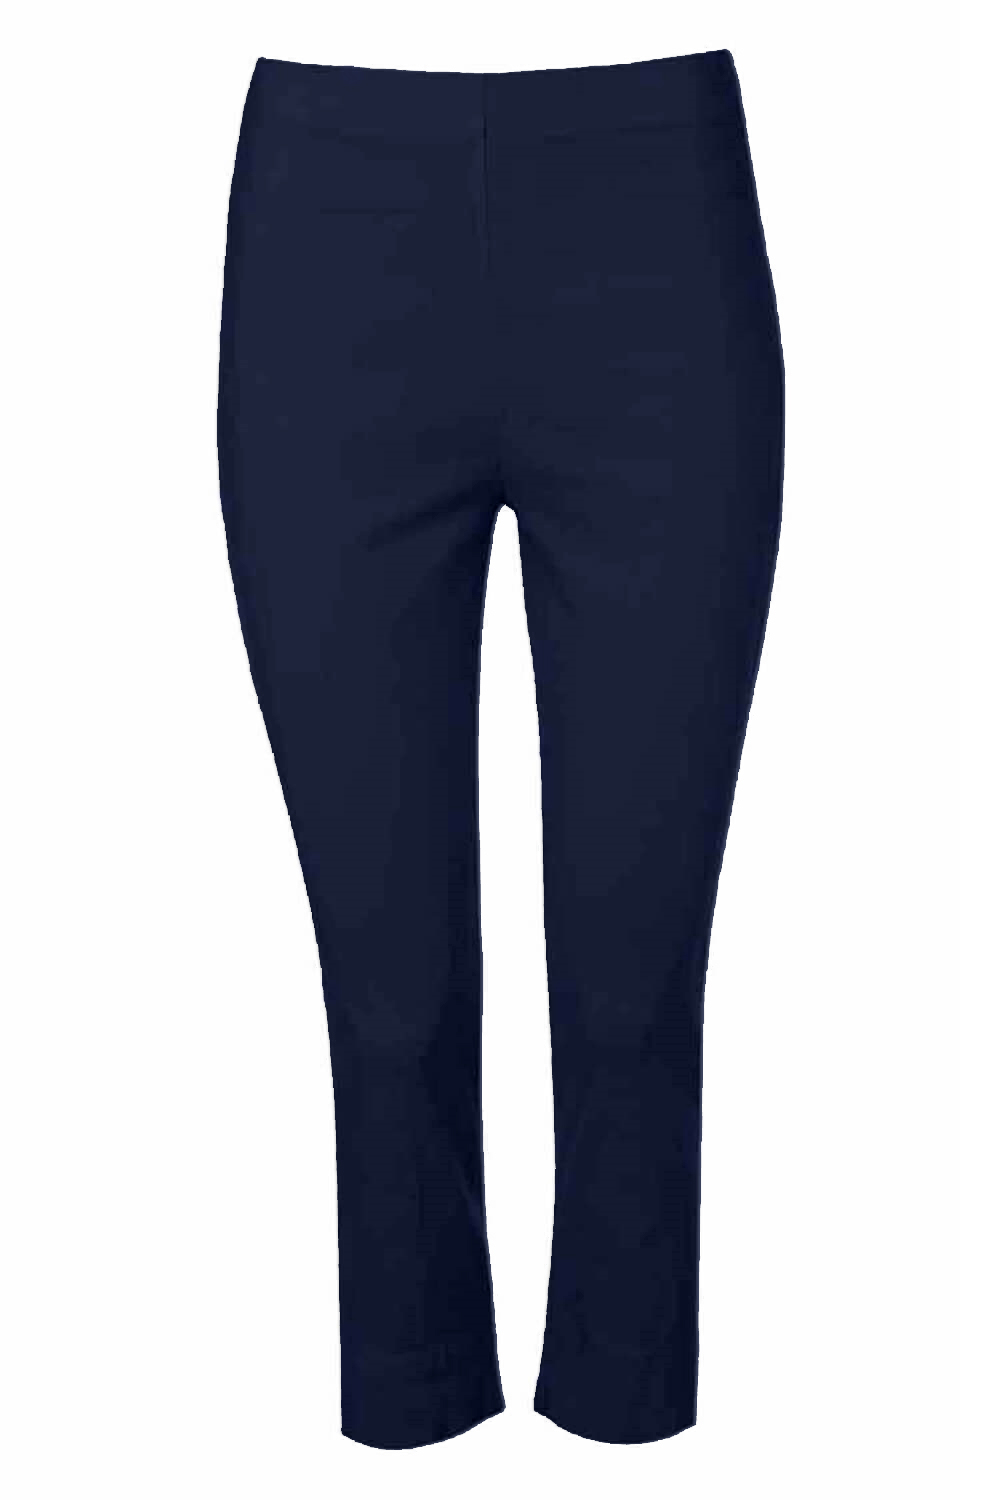 Navy Blue  Petite Cropped Stretch Trousers, Image 4 of 4